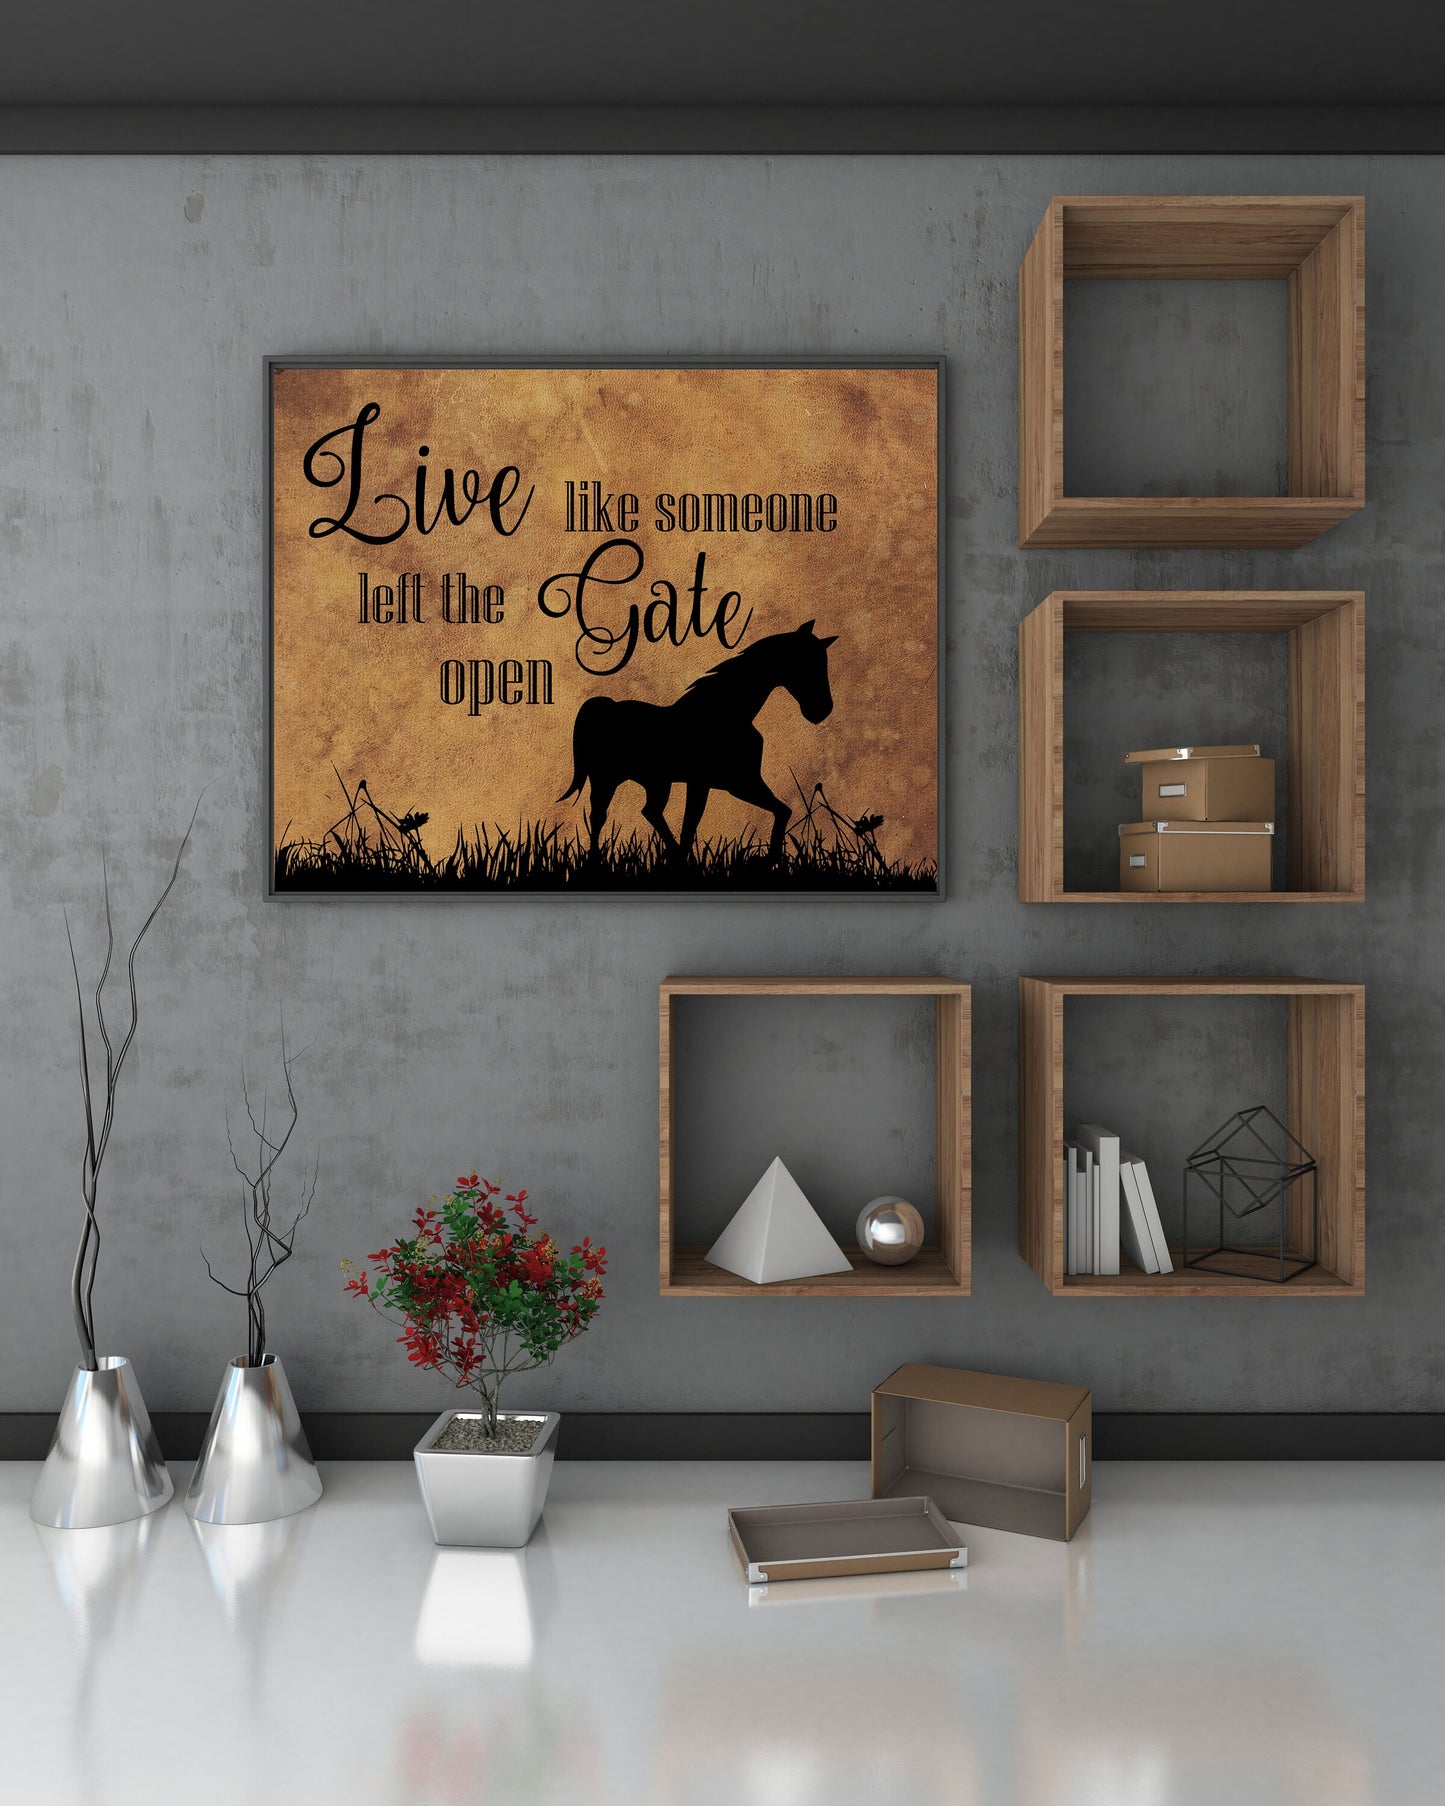 16 x 20 Live Like Someone Left the Gate Open Canvas Print